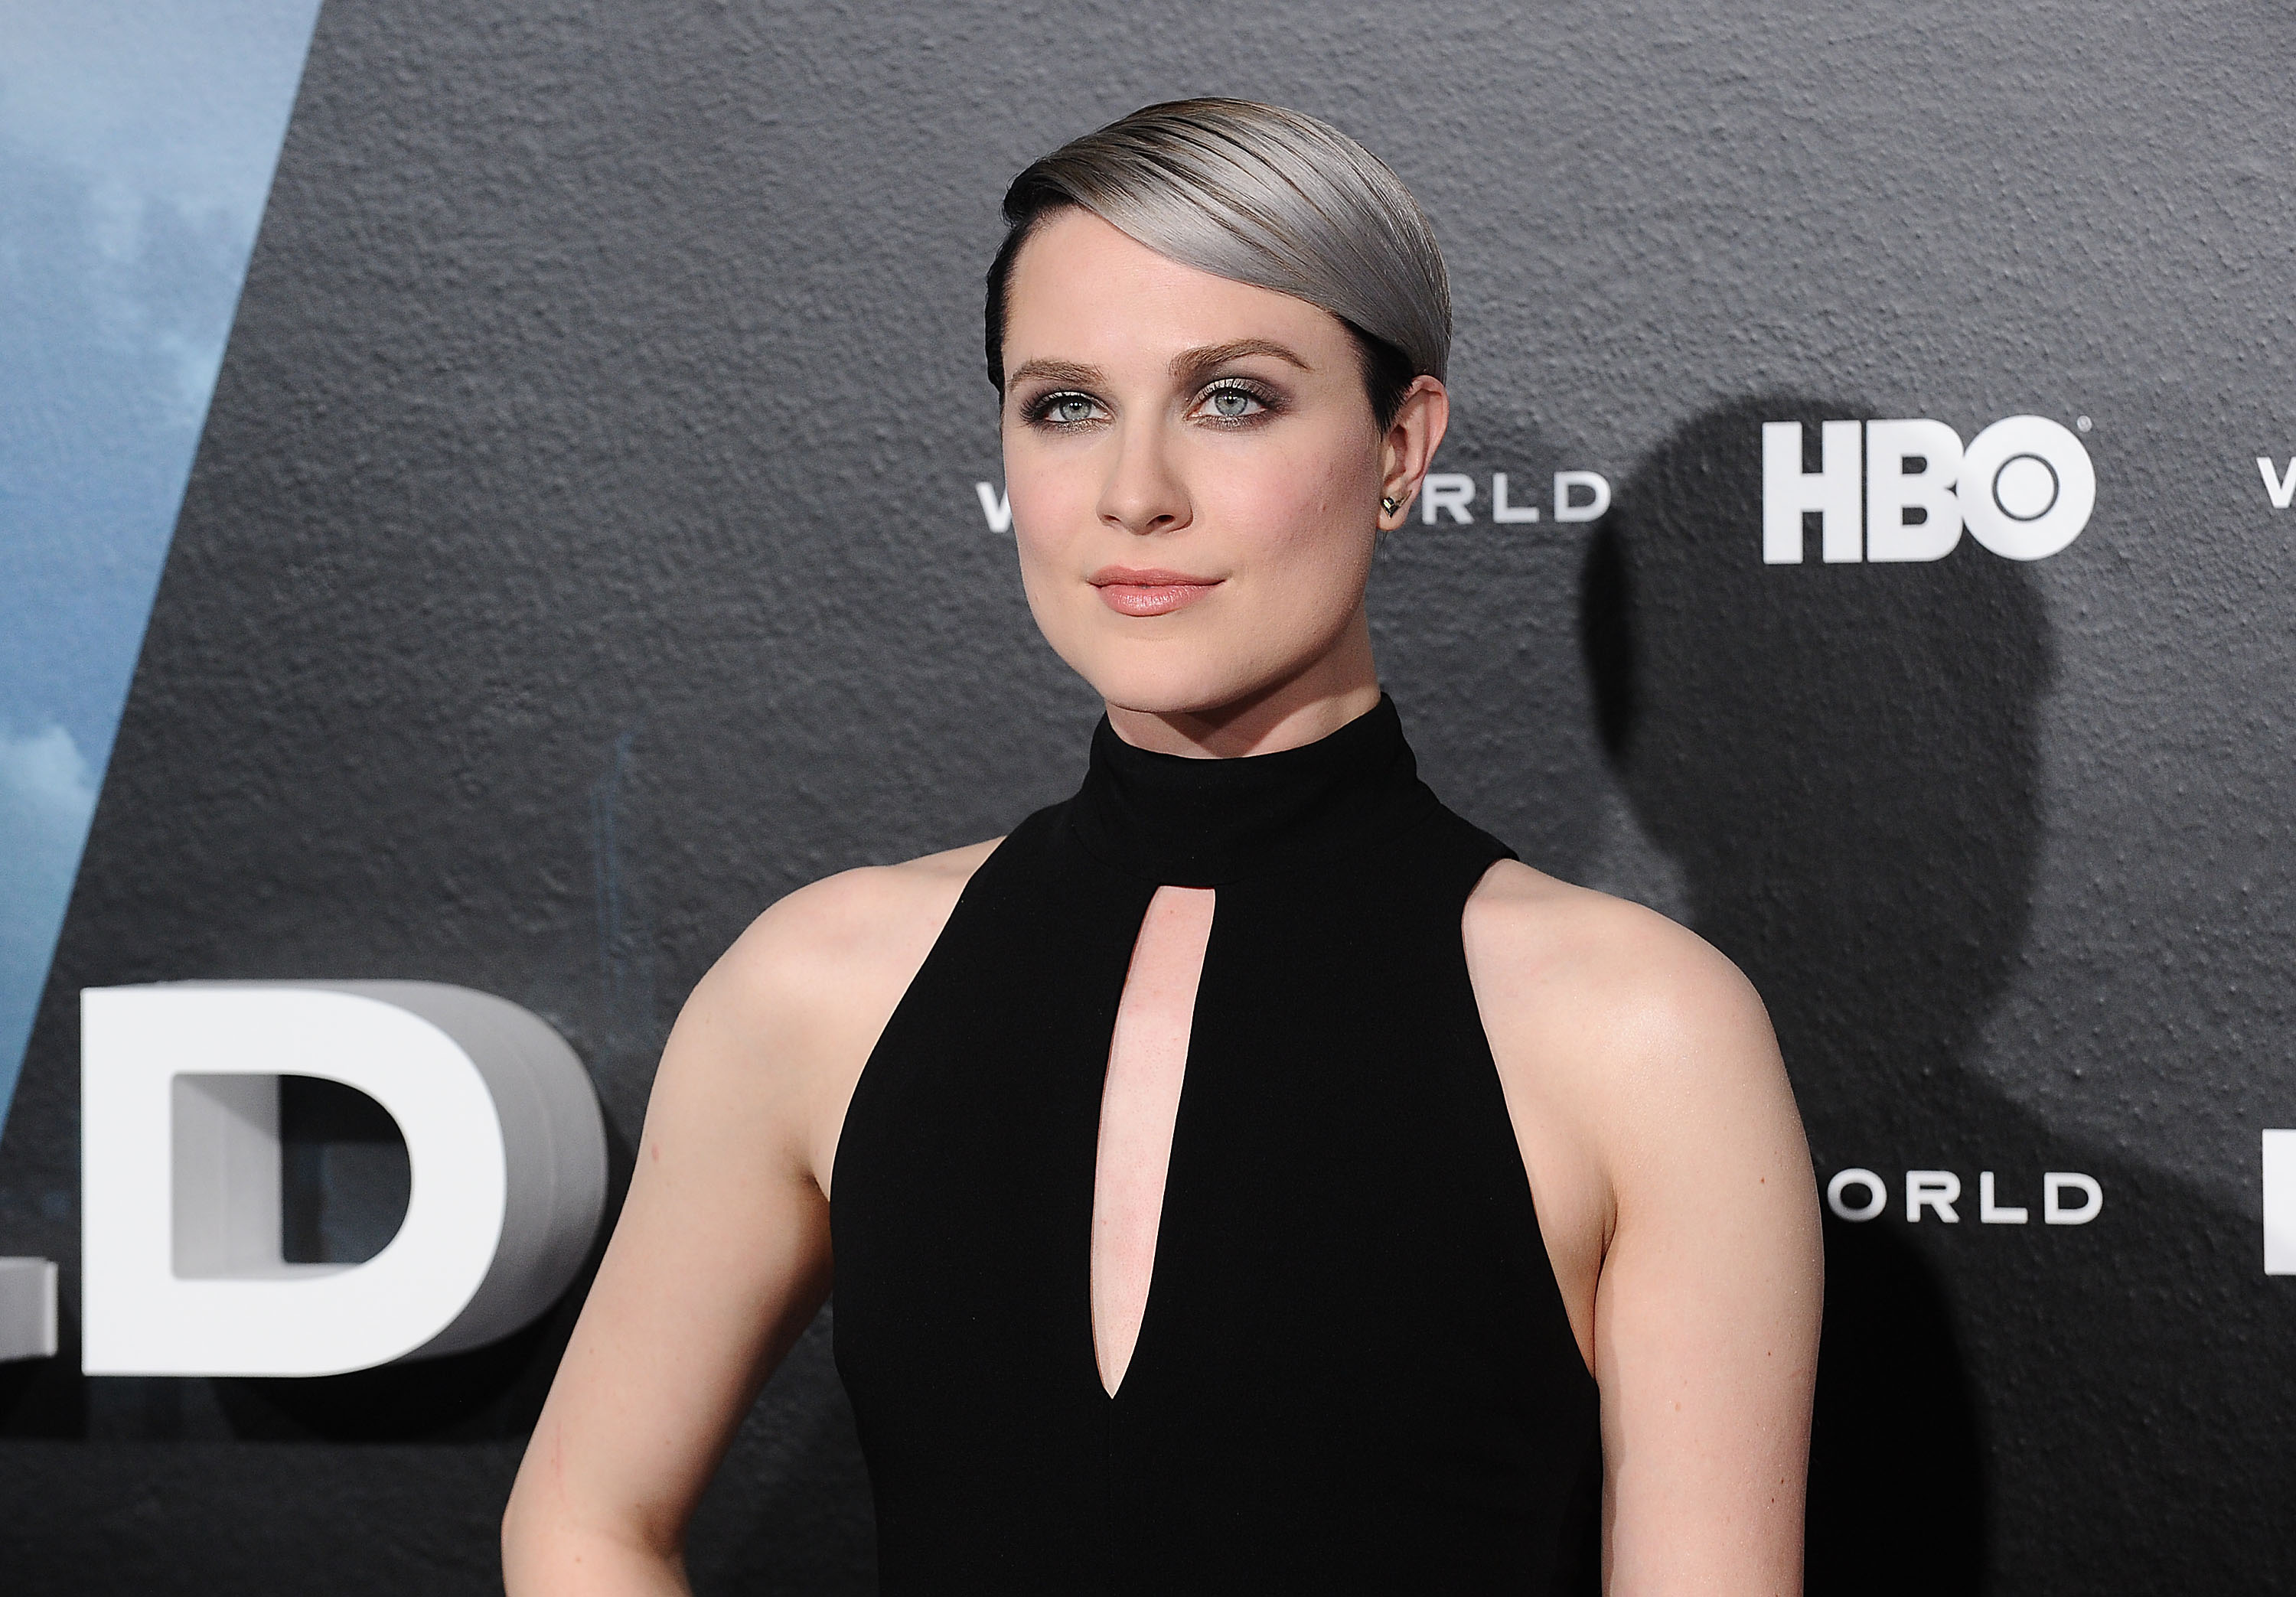 Premiere Of HBO's "Westworld" - Arrivals